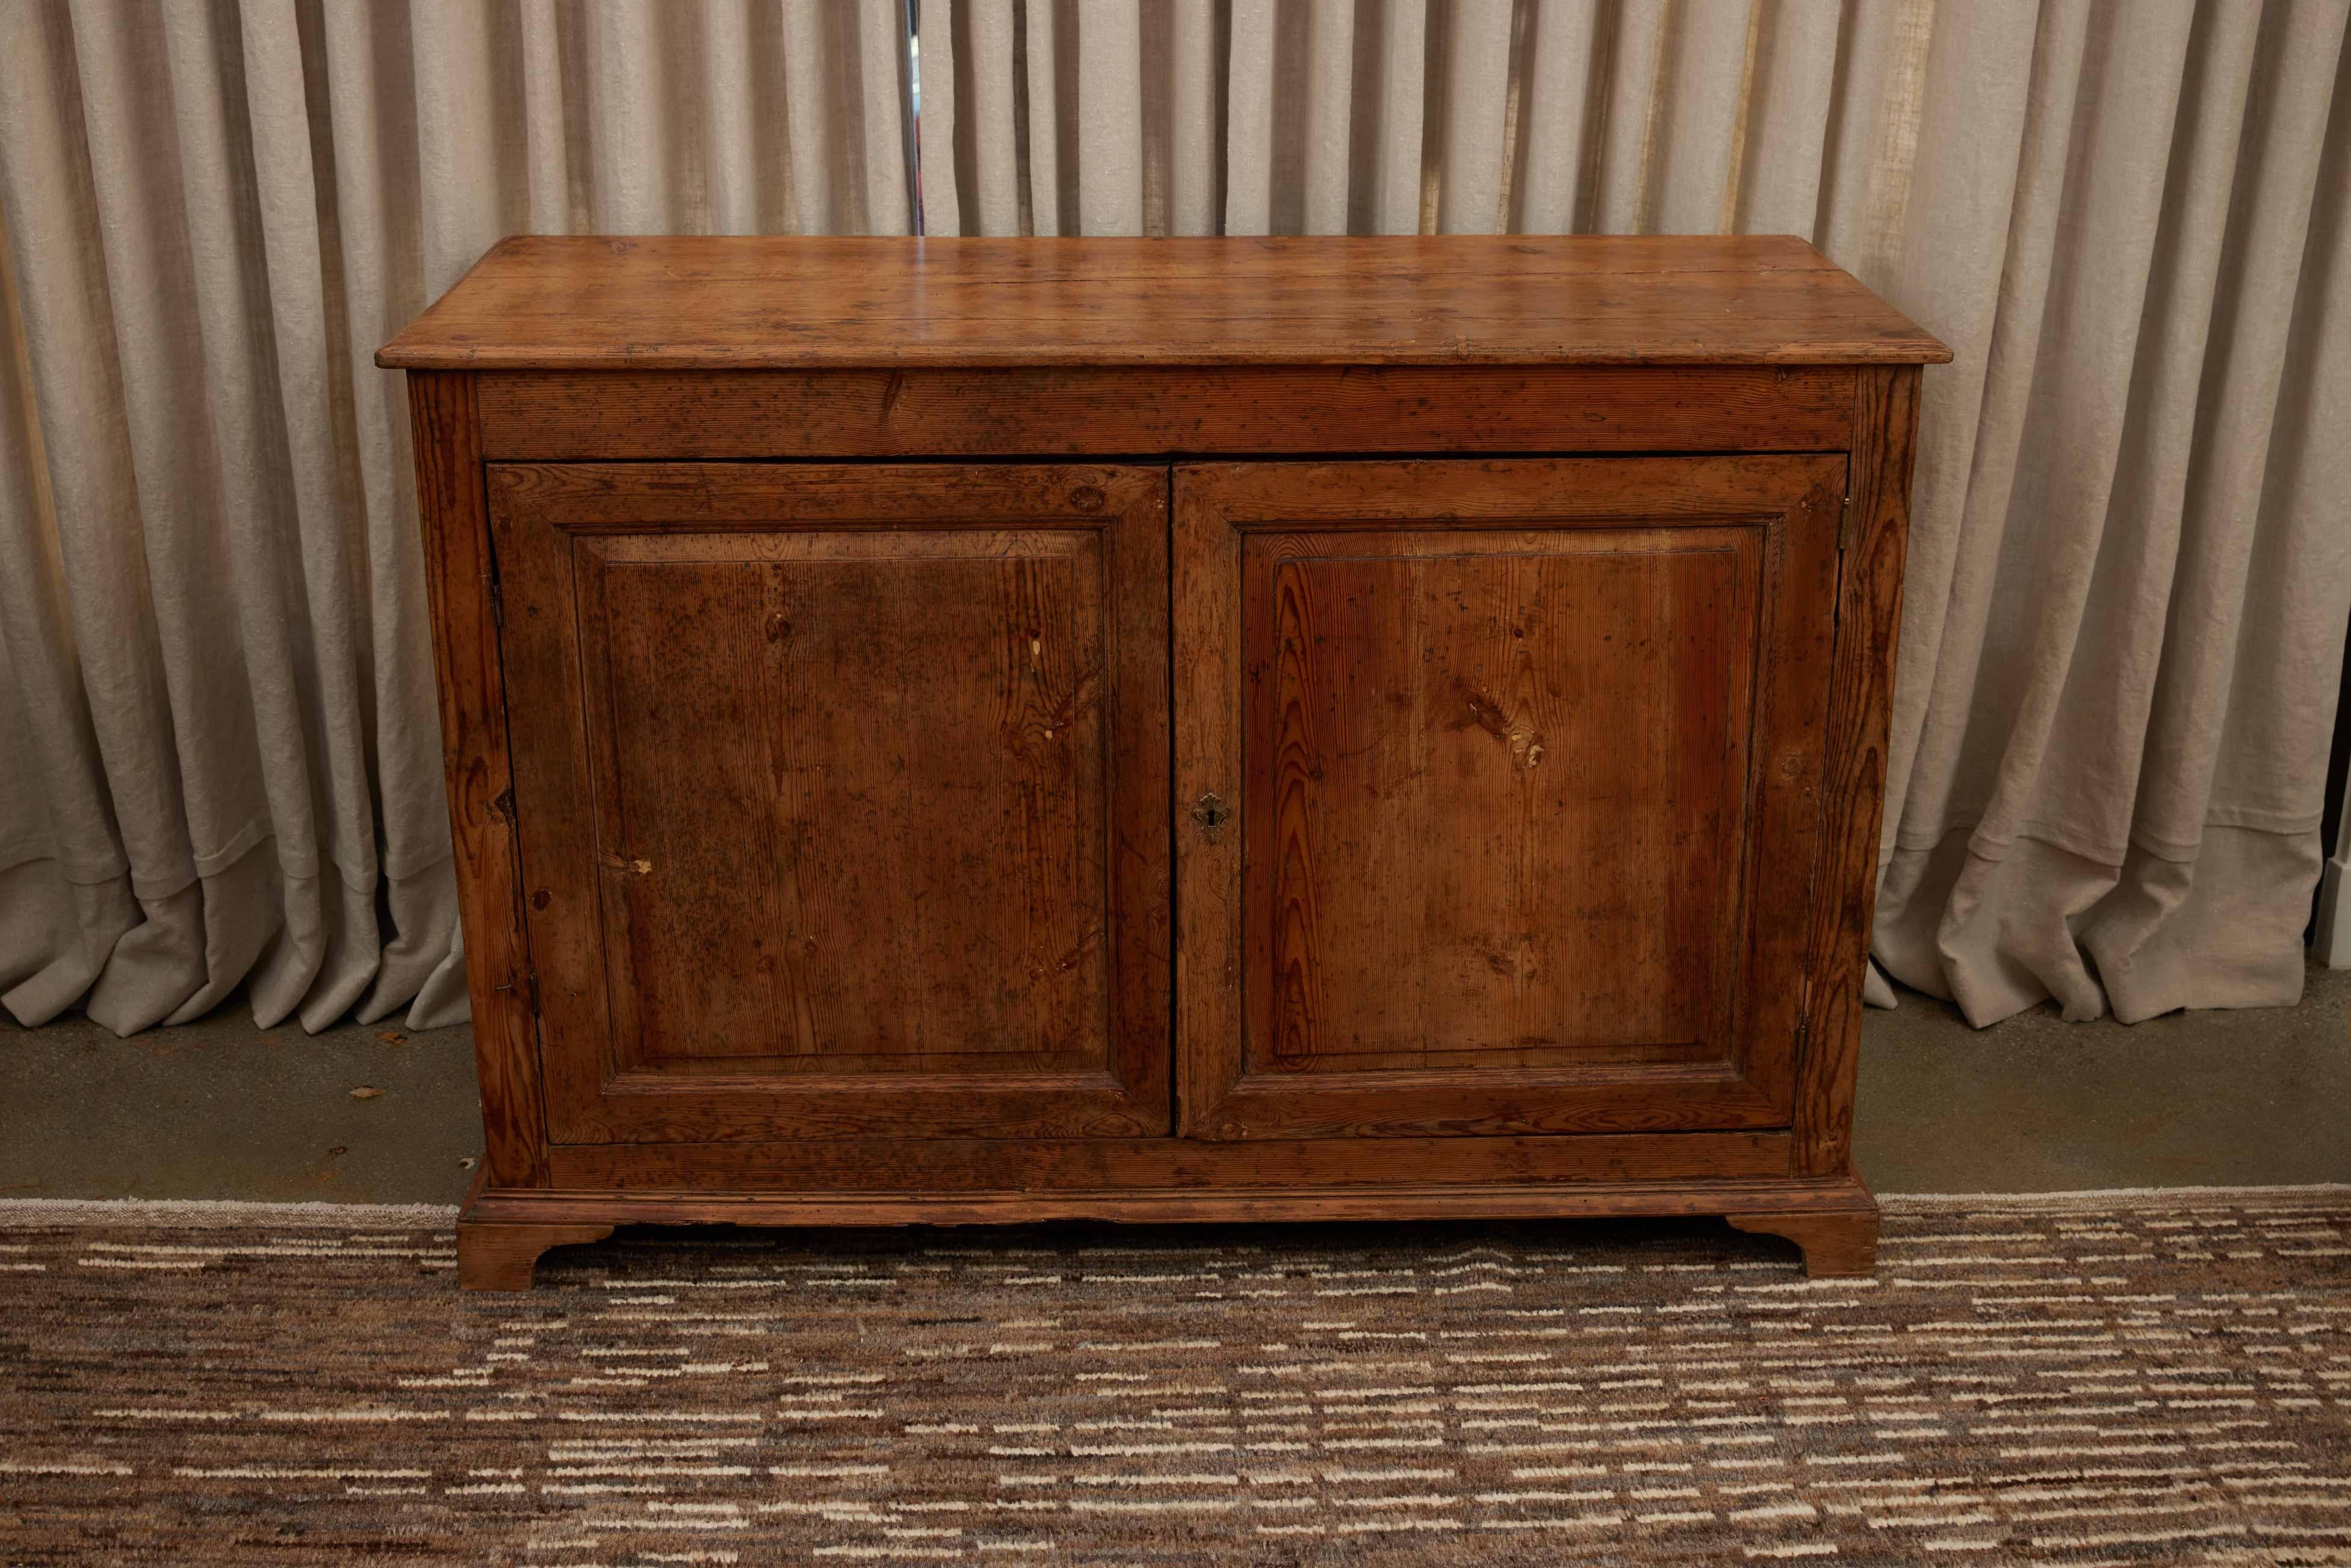 Italian Credenza Oak and Pine, 19th Century 

Introducing an exquisite 19th-century Italian Credenza, crafted from premium oak with a stunning finish of warm brown hues that highlight the wood's natural beauty. Measuring 58 1/2